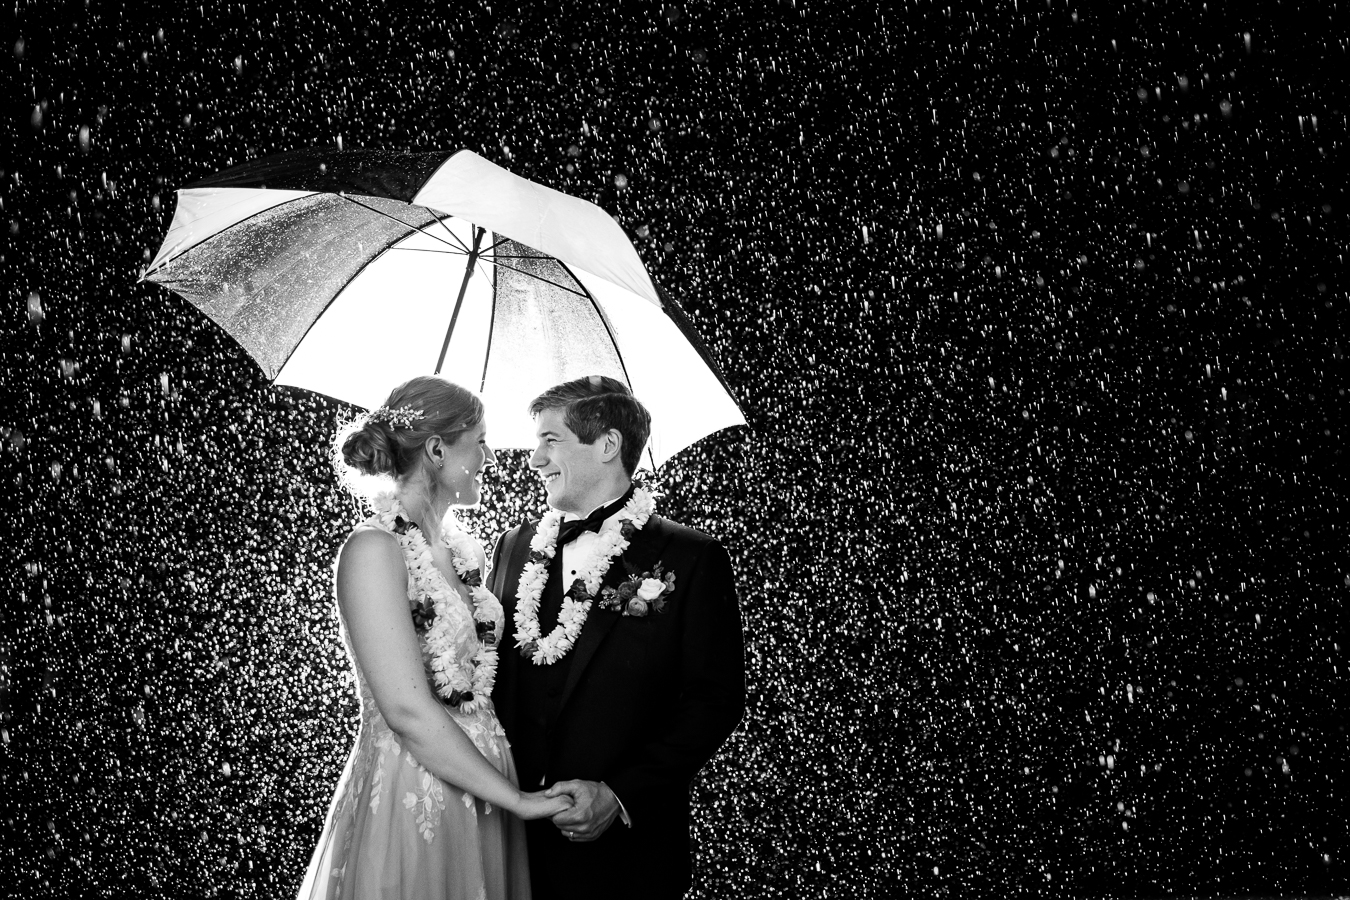 Elizabeth Furnace Wedding photographer, rhinehart photography, captures this black and white image of the bride and groom as they hold hands and smile at one another under neath the umbrella to avoid their rainy wedding weather in lititz pa 